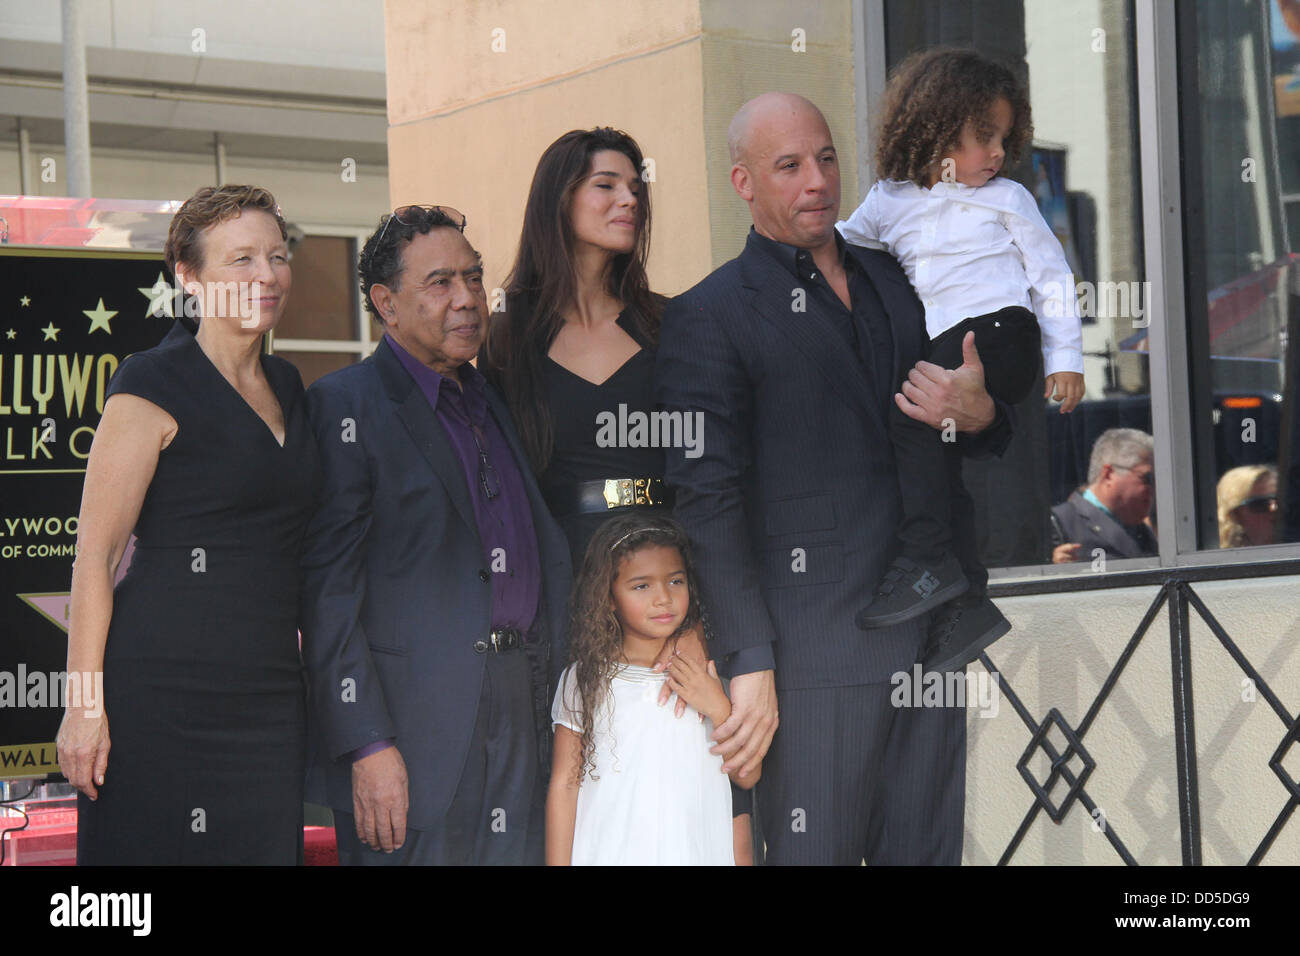 Hollywood, California, USA. 25th Aug, 2013. Vin Diesel Honored With Star On The Hollywood Walk Of Fame .Hollywood Blvd At Hollywood Roosevelt Hotel, Hollywood, CA.08/26/2013 .VIN DIESEL WITH PALOMA JIMINEZ AND CHILDREN - DELORA SHERLEEN VINCENT - MOTHER OF VIN DIESEL AND IRVING H. VINCENT - STEPFATHER OF VIN DIESEL . 2013 Credit:  Clinton Wallace/Globe Photos/ZUMAPRESS.com/Alamy Live News Stock Photo